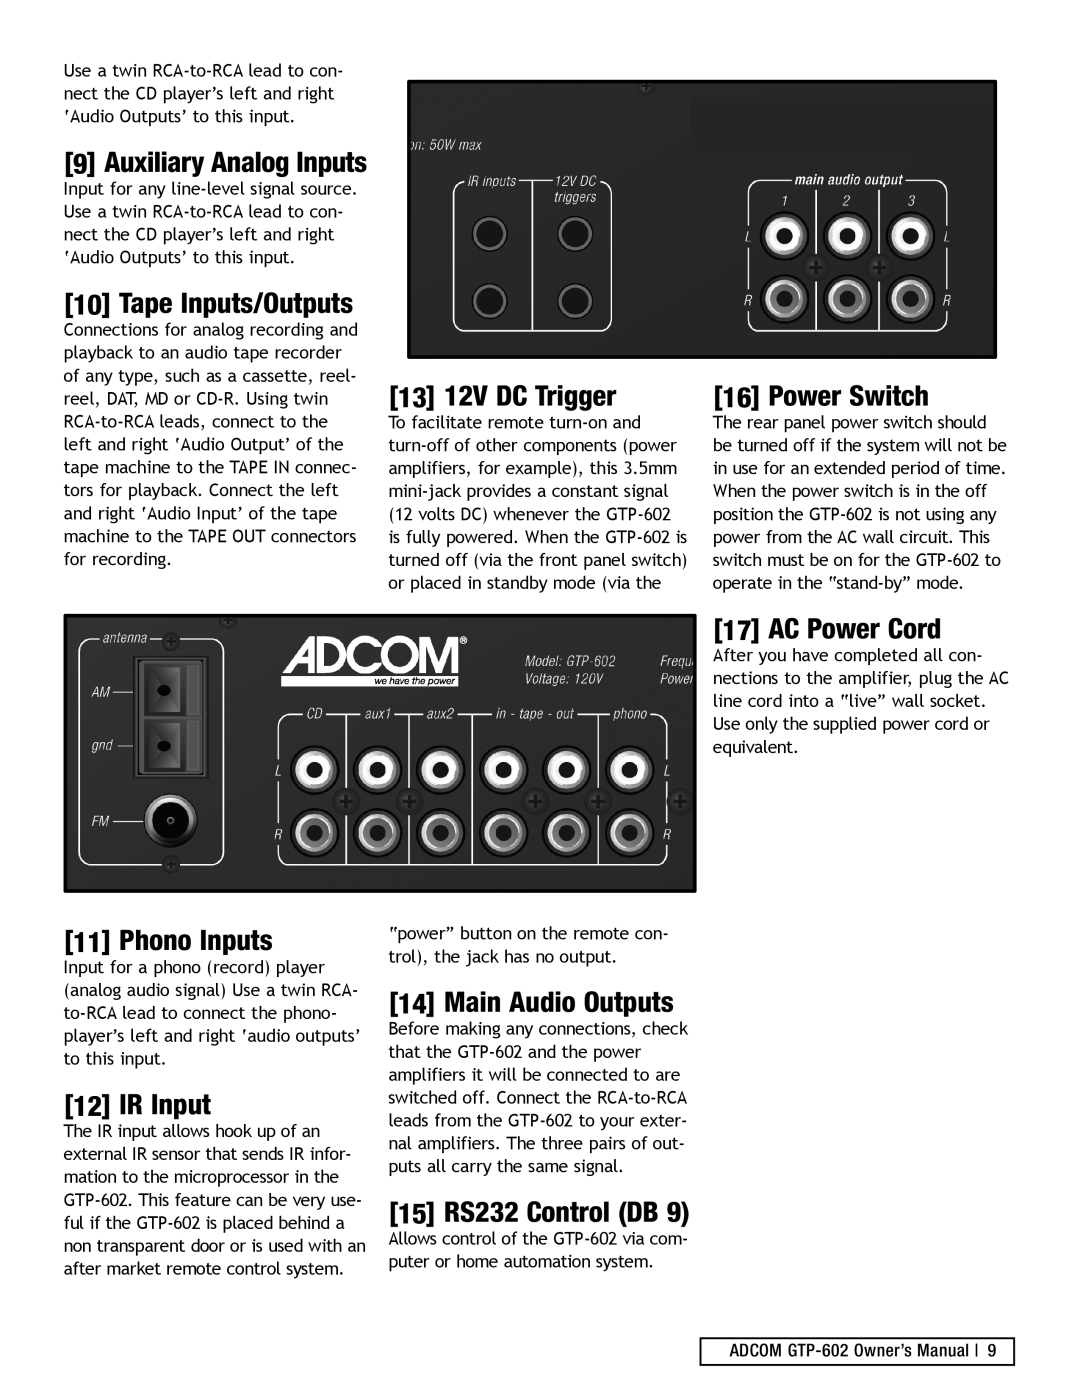 Adcom GTP-602 Auxiliary Analog Inputs, Tape Inputs/Outputs, 13 12V DC Trigger, Power Switch, AC Power Cord, Phono Inputs 